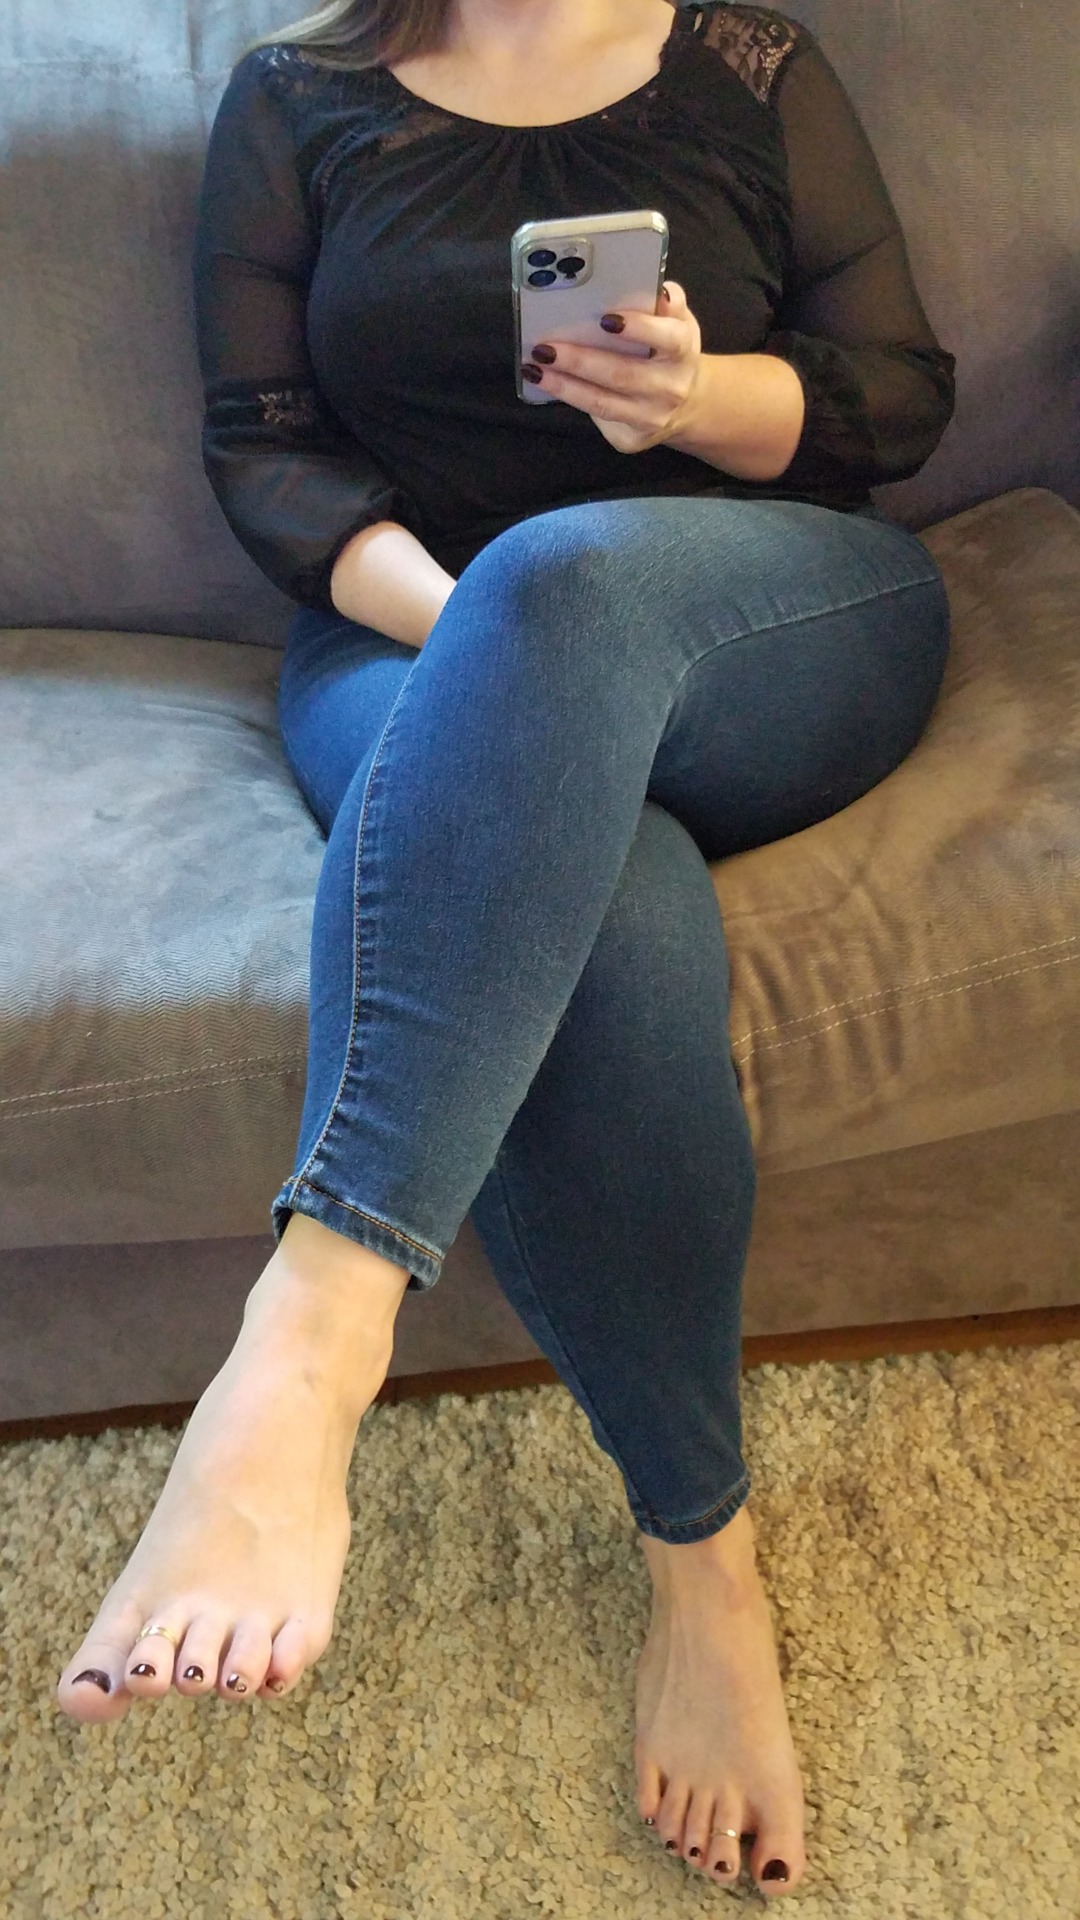 Candid Homemade And All Original Pics — A Beautiful Candid Look At My Pretty Wife As Shes